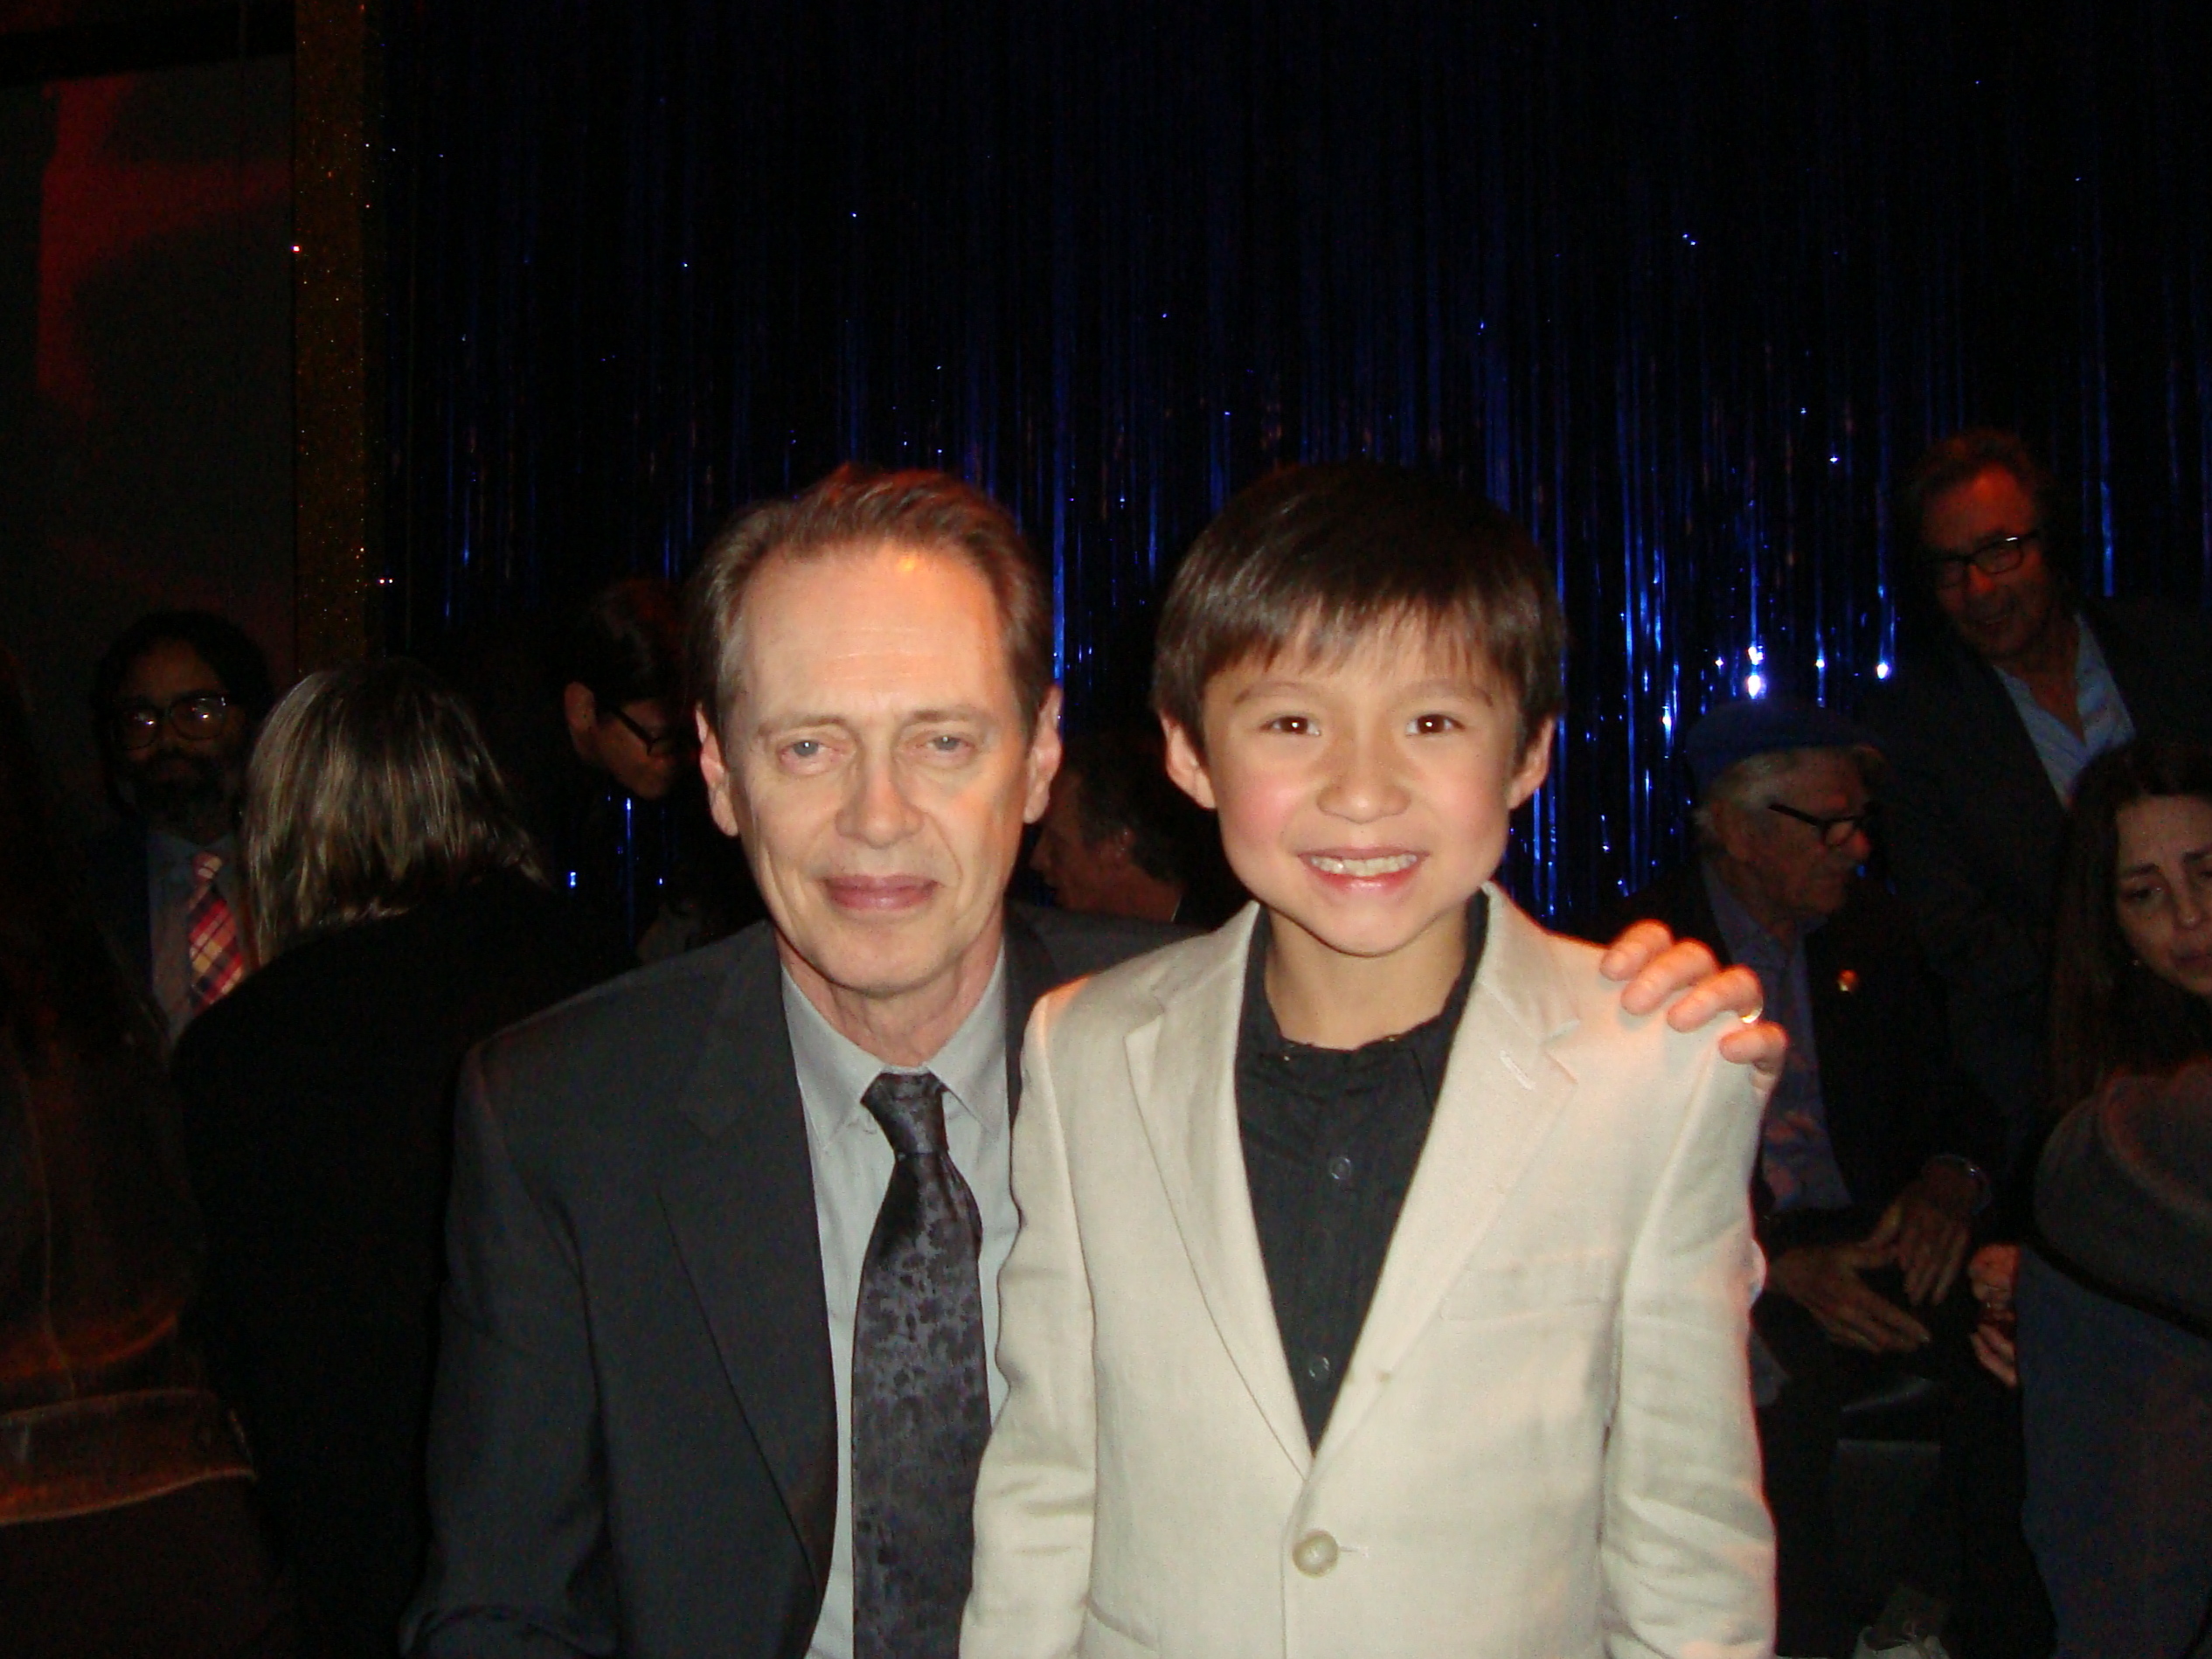 Steve Buscemi and Forrest Wheeler at The Incredible Burt Wonderstone Premiere Party 2013